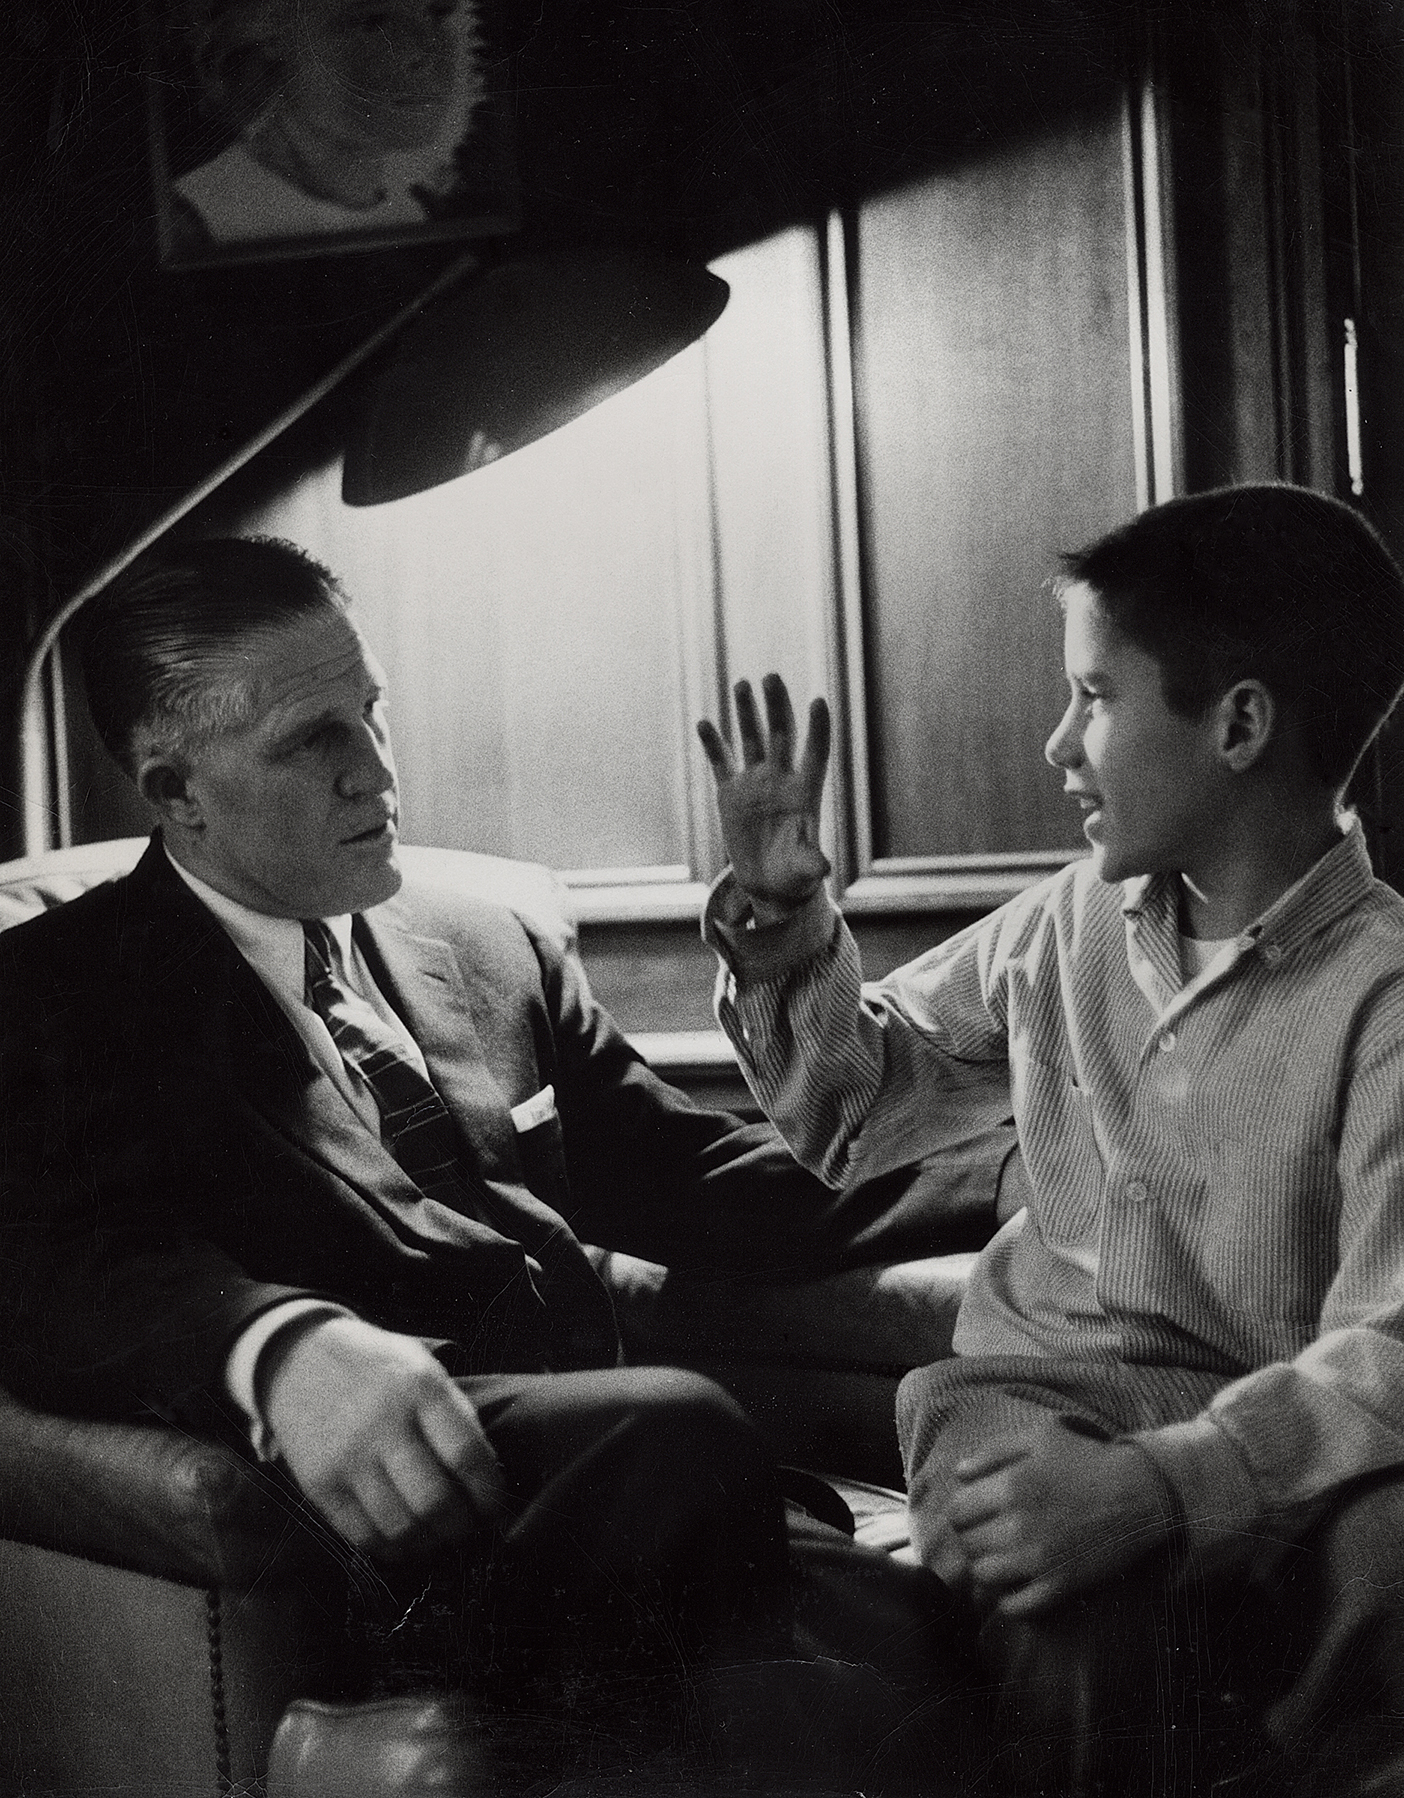 a black and white photo of Romney in a suit with a young son sitting next to him